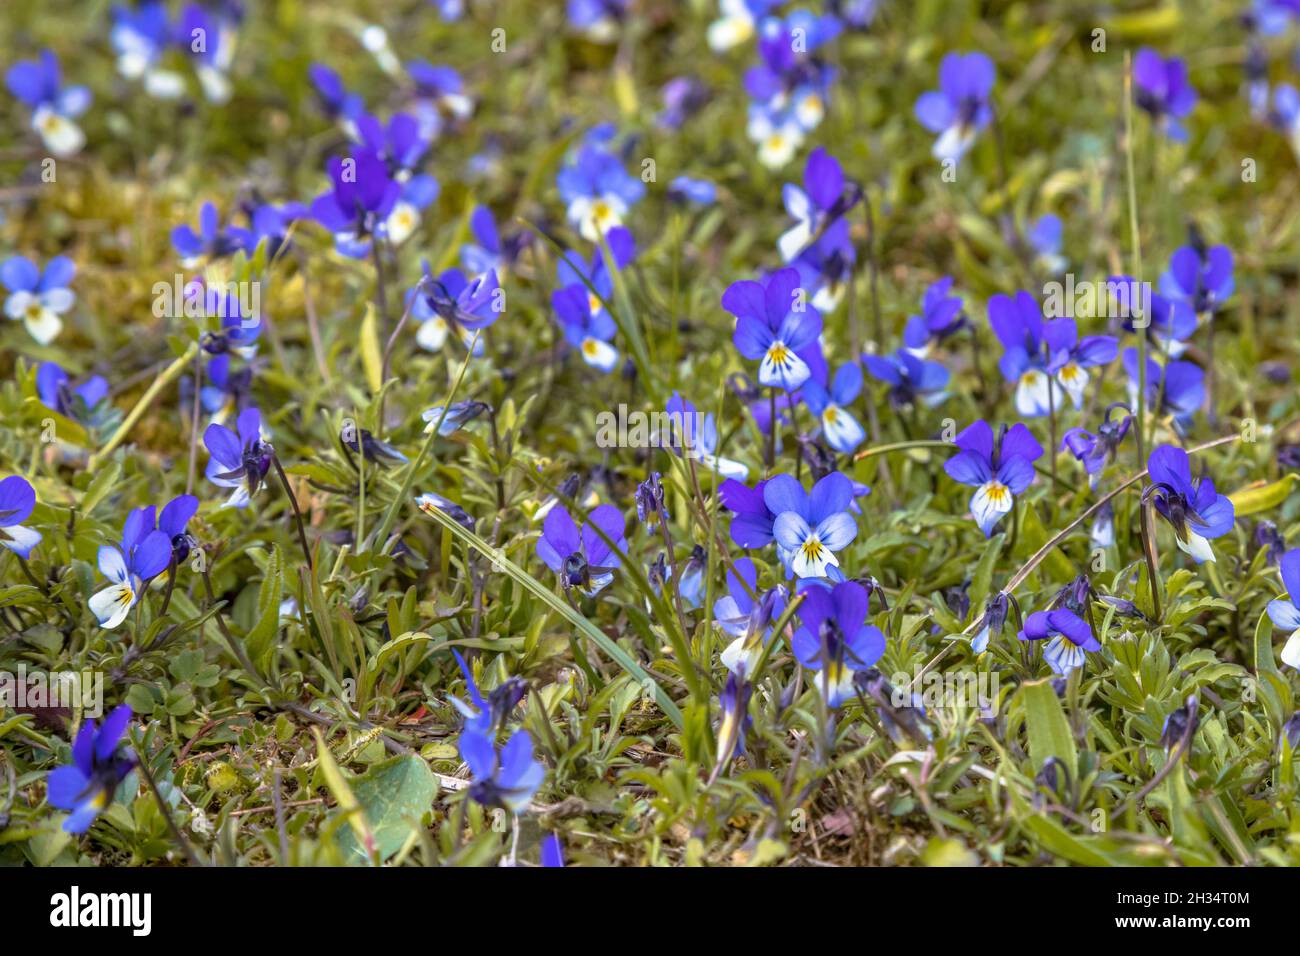 Dune Heartsease (Viola tricolor subsp. curtisii) blooming in dunes of Ameland Stock Photo